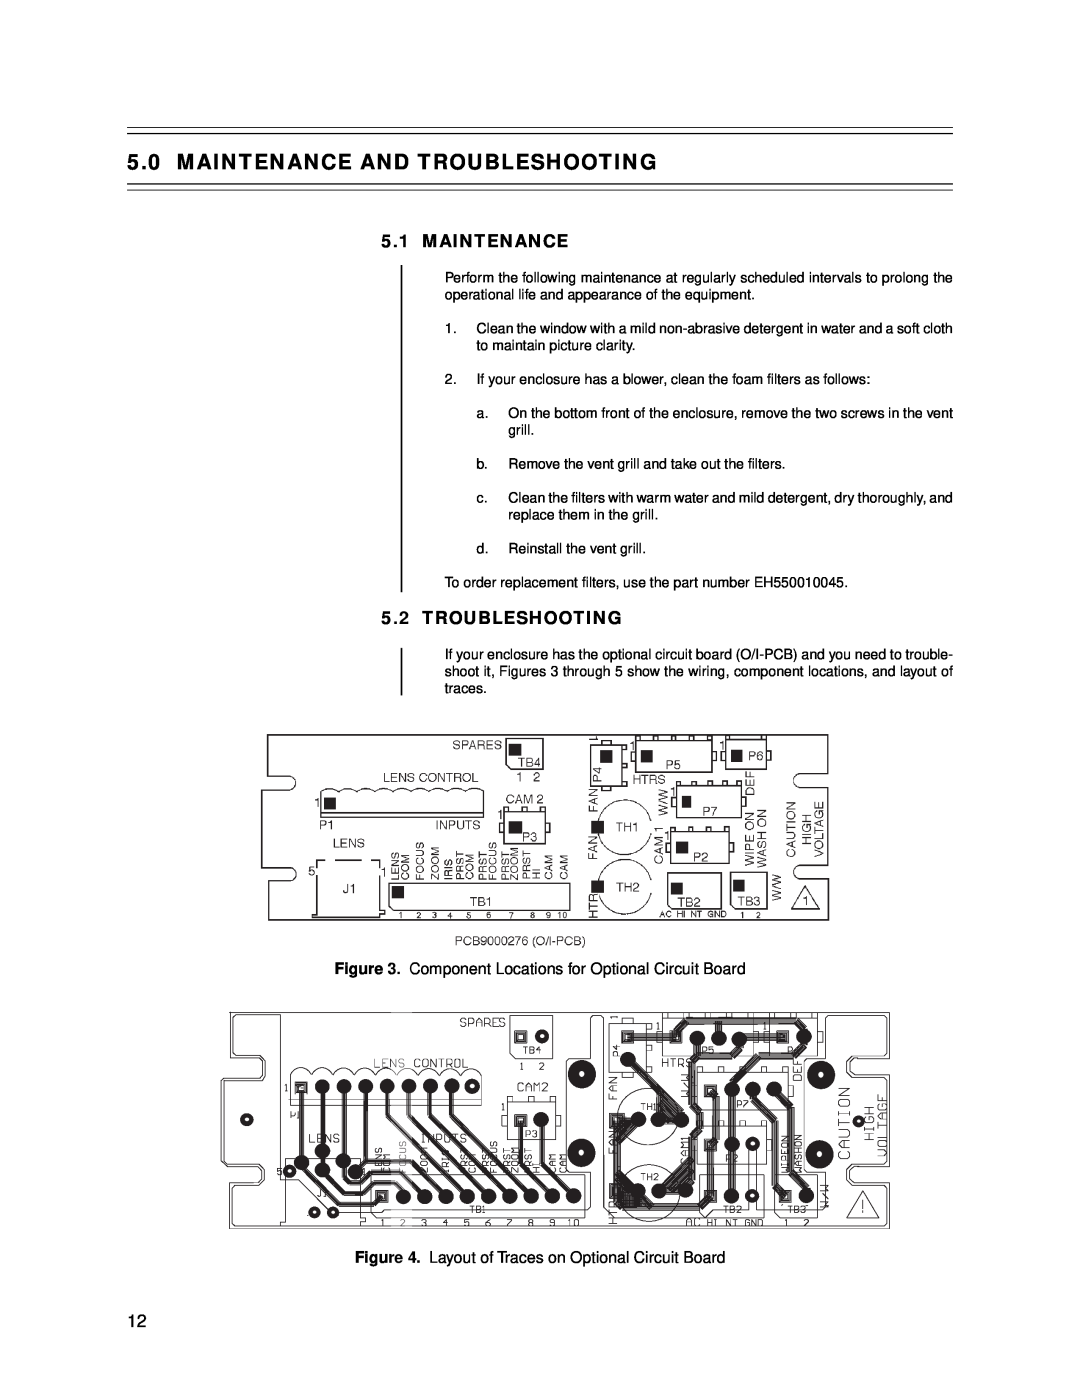 Bosch Appliances tc9346a instruction manual Maintenance And Troubleshooting, Component Locations for Optional Circuit Board 